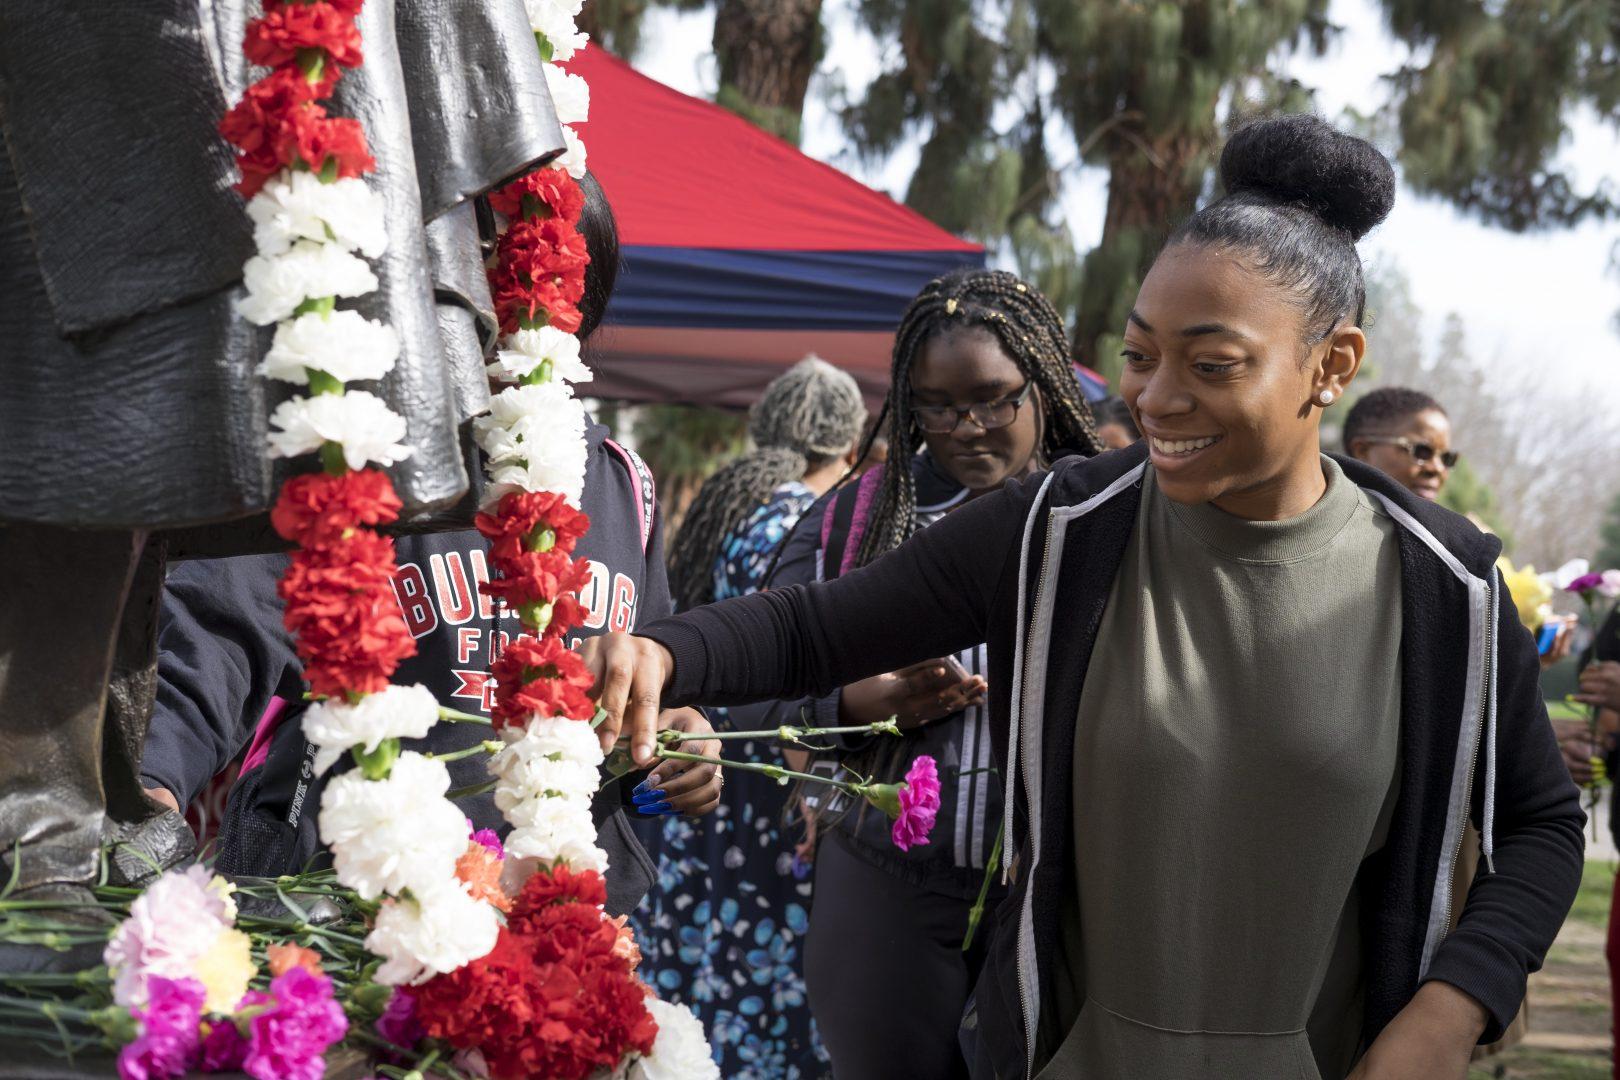 Fresno+State+junior+and+President+of+the+Black+Students+United%2C+Diamond+Morehead+leaves+a+rose+at+the+foot+of+the+statue+of+the+Rev.+Martin+Luther+King+Jr.+during+an+MLK+Commemoration+at+the+Peace+Garden+on+Thursday%2C+Jan.+18%2C+2018.+%28Ramuel+Reyes%2FThe+Collegian%29